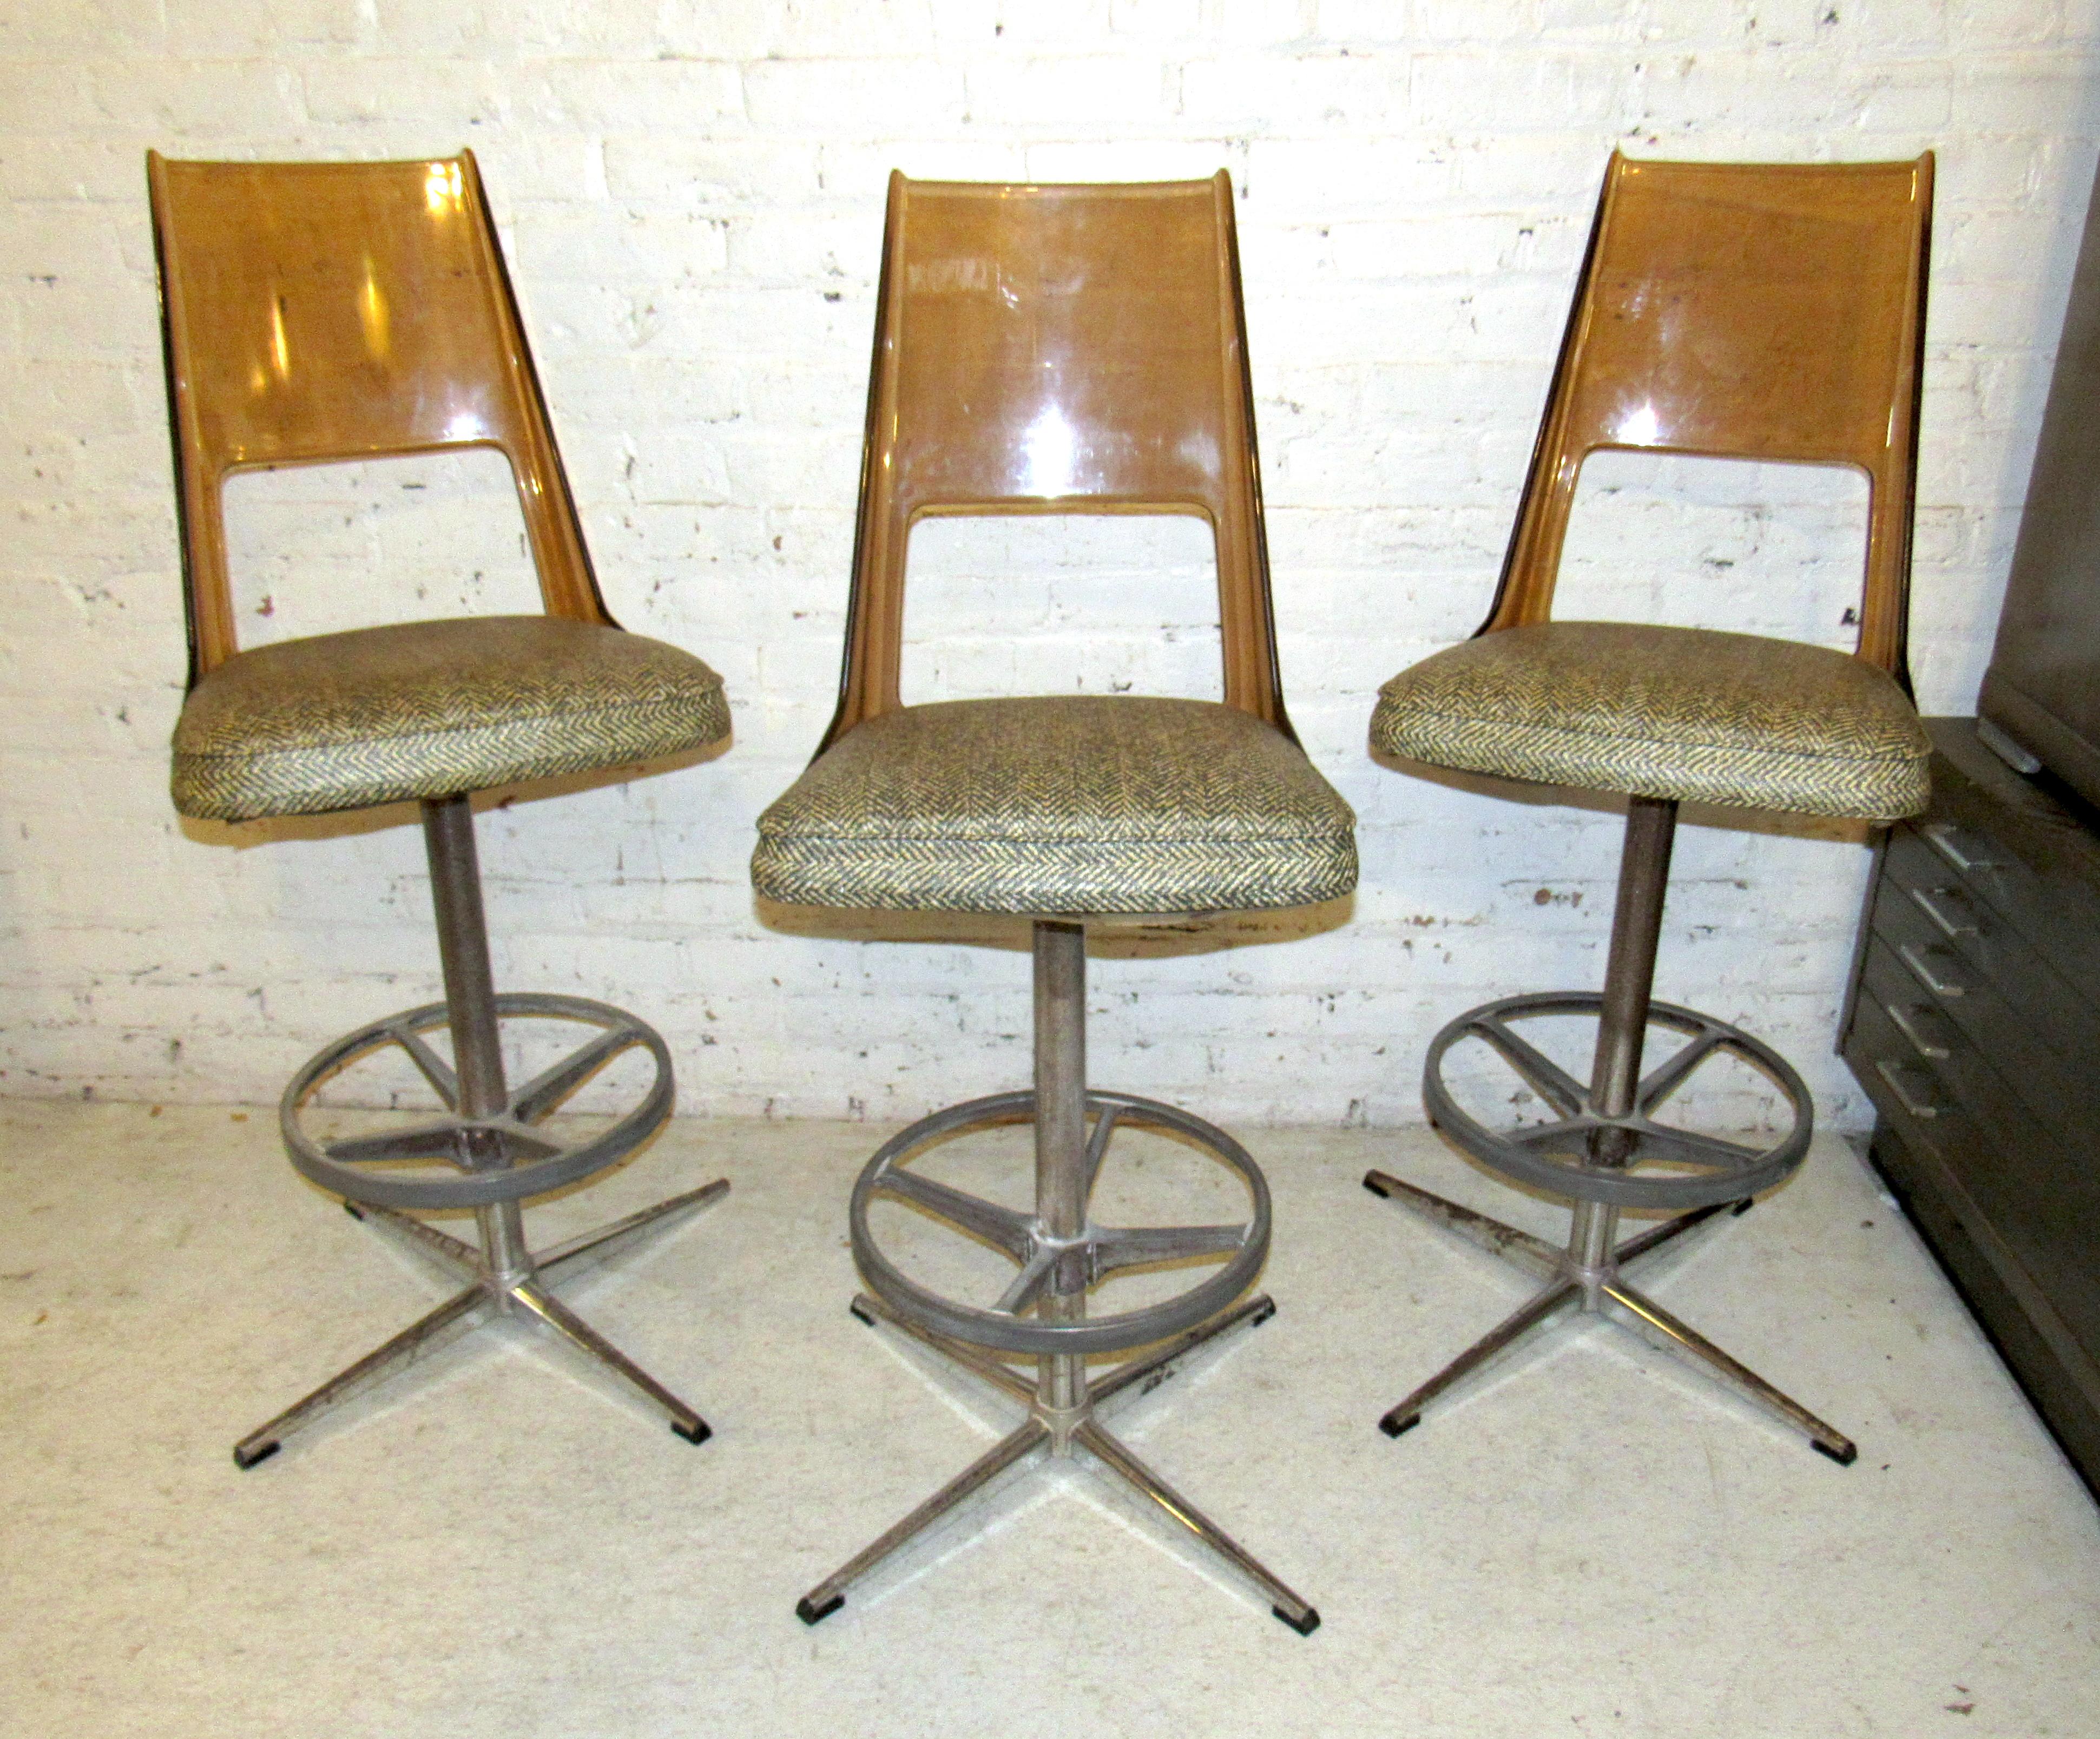 Vintage modern set of three stools featuring a vinyl seat and Lucite backrest on a sturdy metal frame.

(Please confirm item location NY or NJ with dealer).